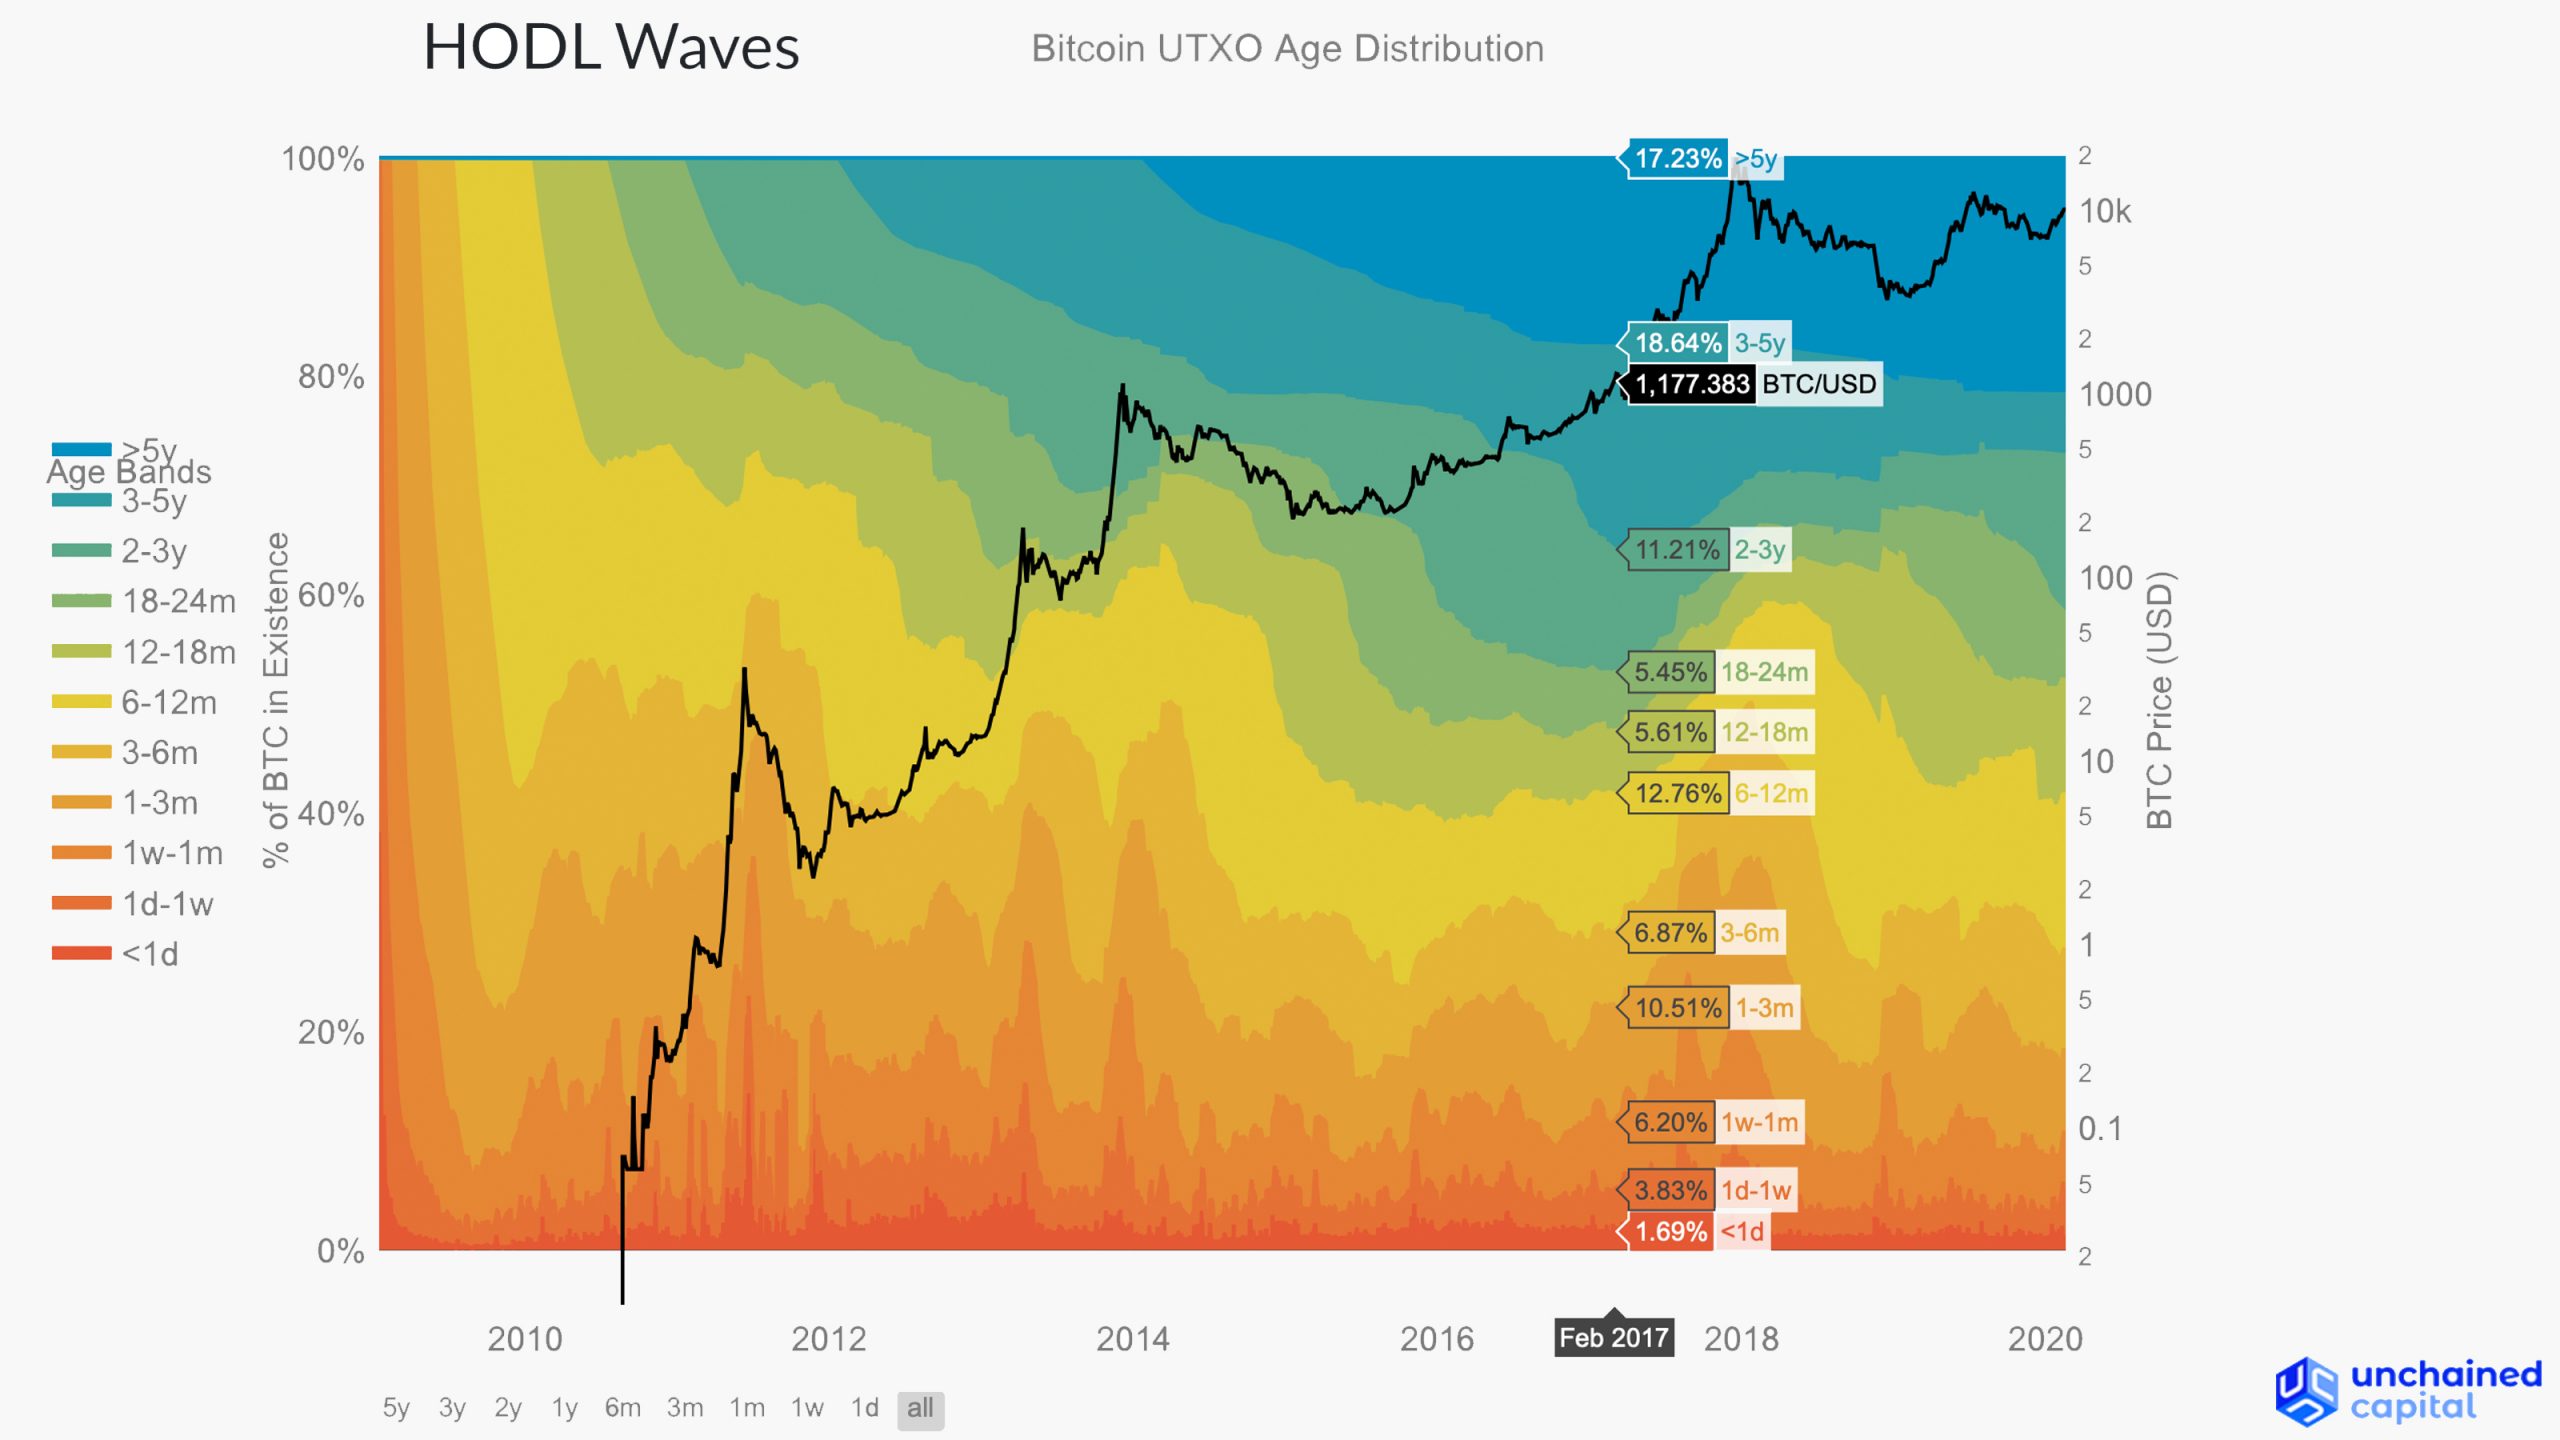 HODL Waves Chart Reveals Bitcoin Holders’ Firm Grip - 42% Hasn’t Moved in 2 Years